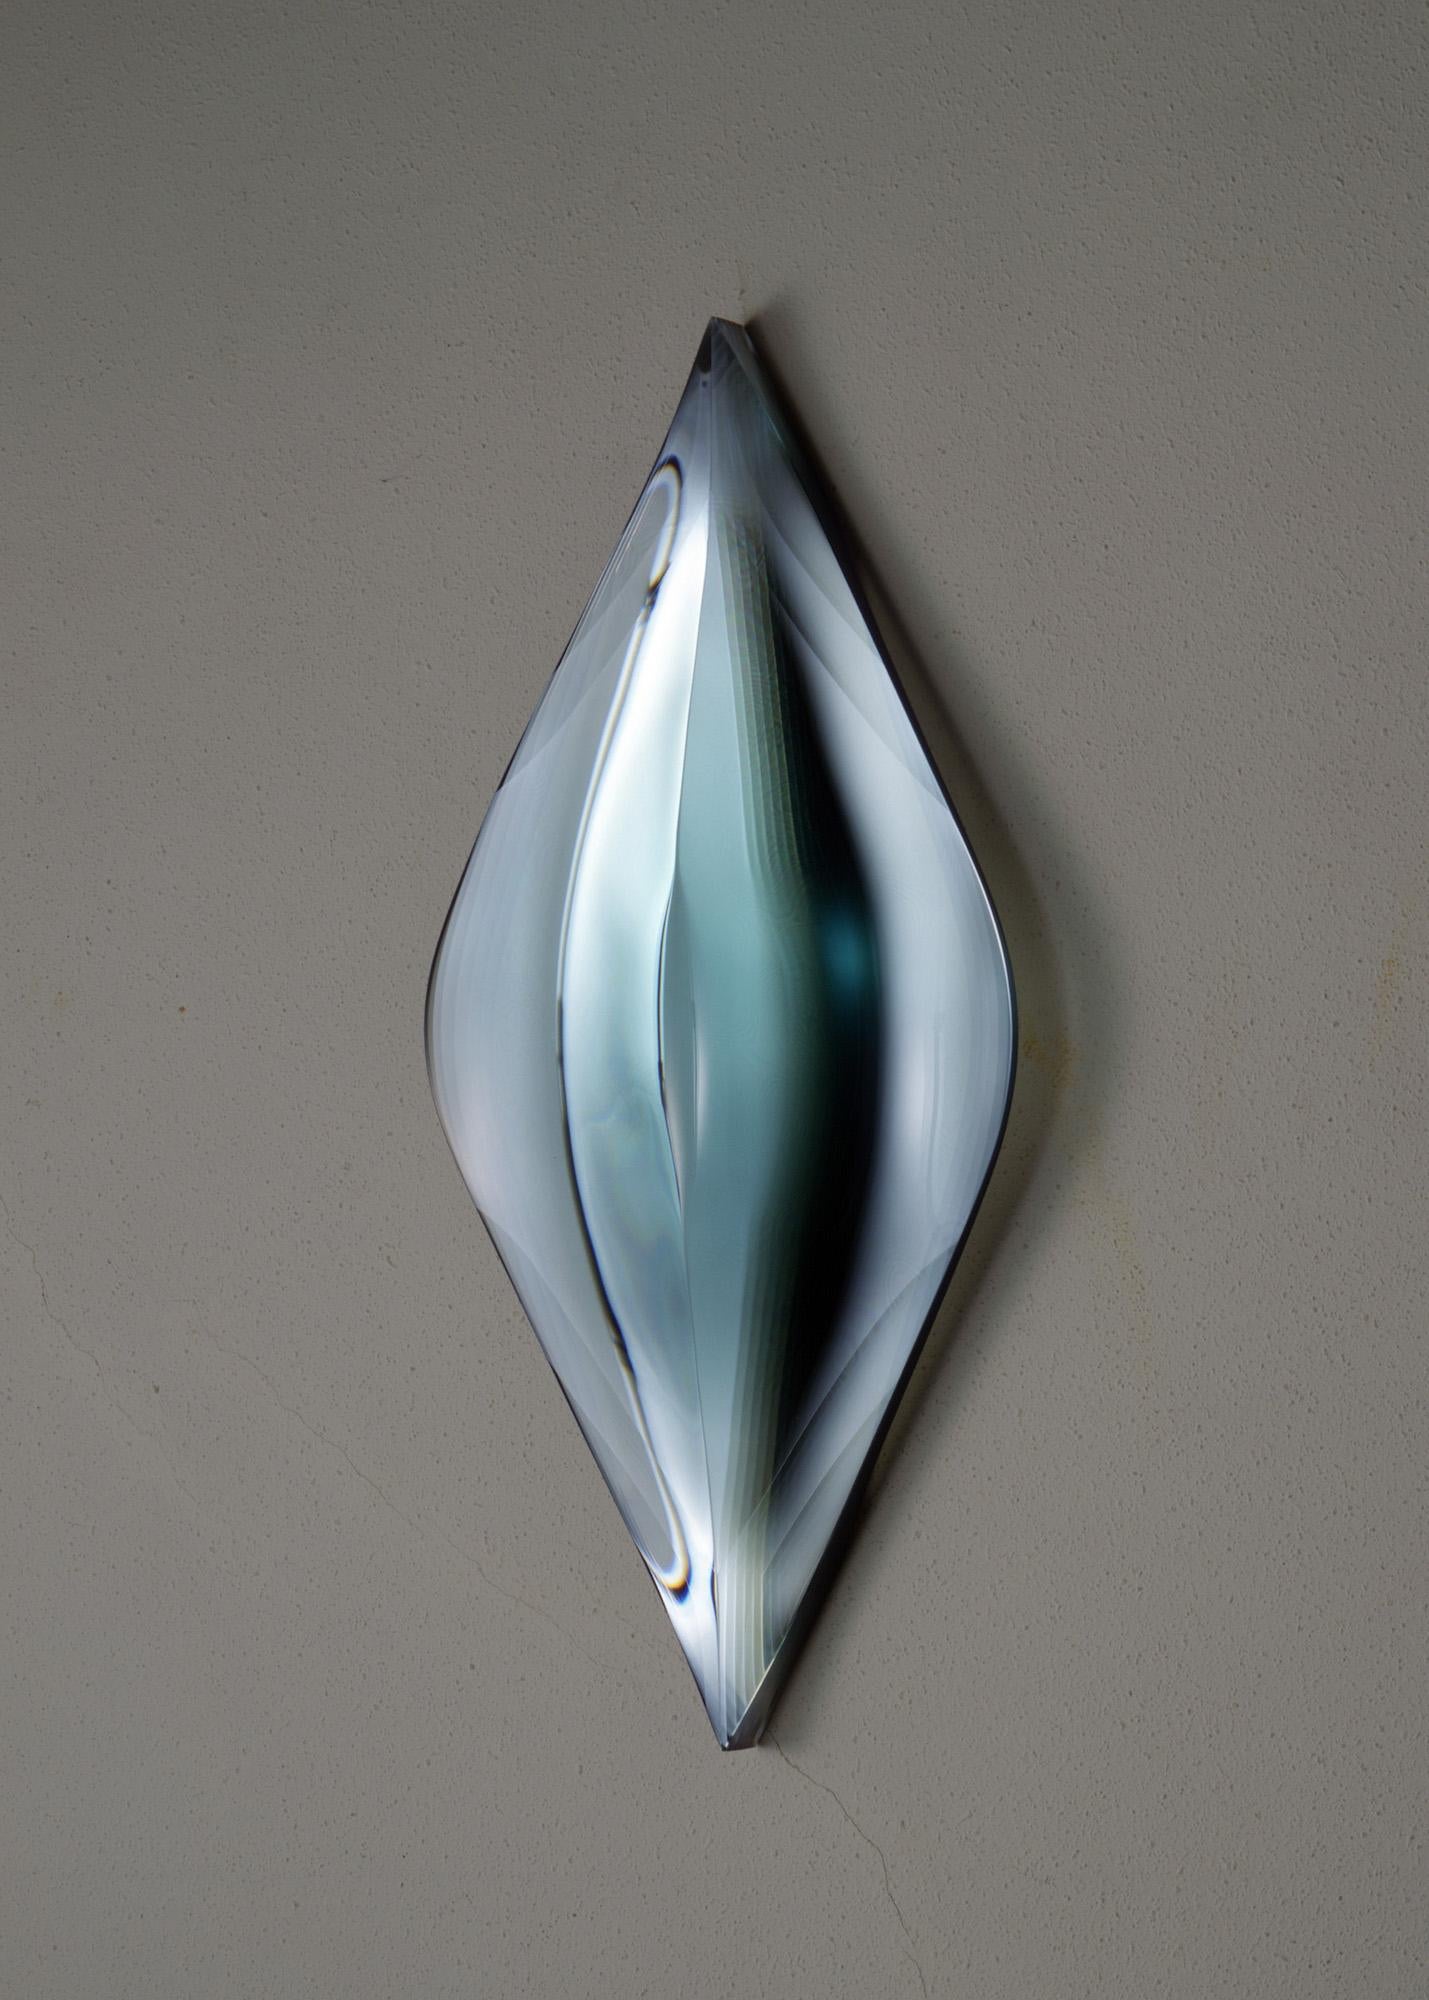 P.010502 is a glass sculpture by Japanese contemporary artist Toshio Iezumi, dimensions are 74 × 32 × 9 cm (29.1 × 12.6 × 3.5 in). 
The sculpture is signed and numbered, it is part of a limited edition of 8 editions and comes with a certificate of